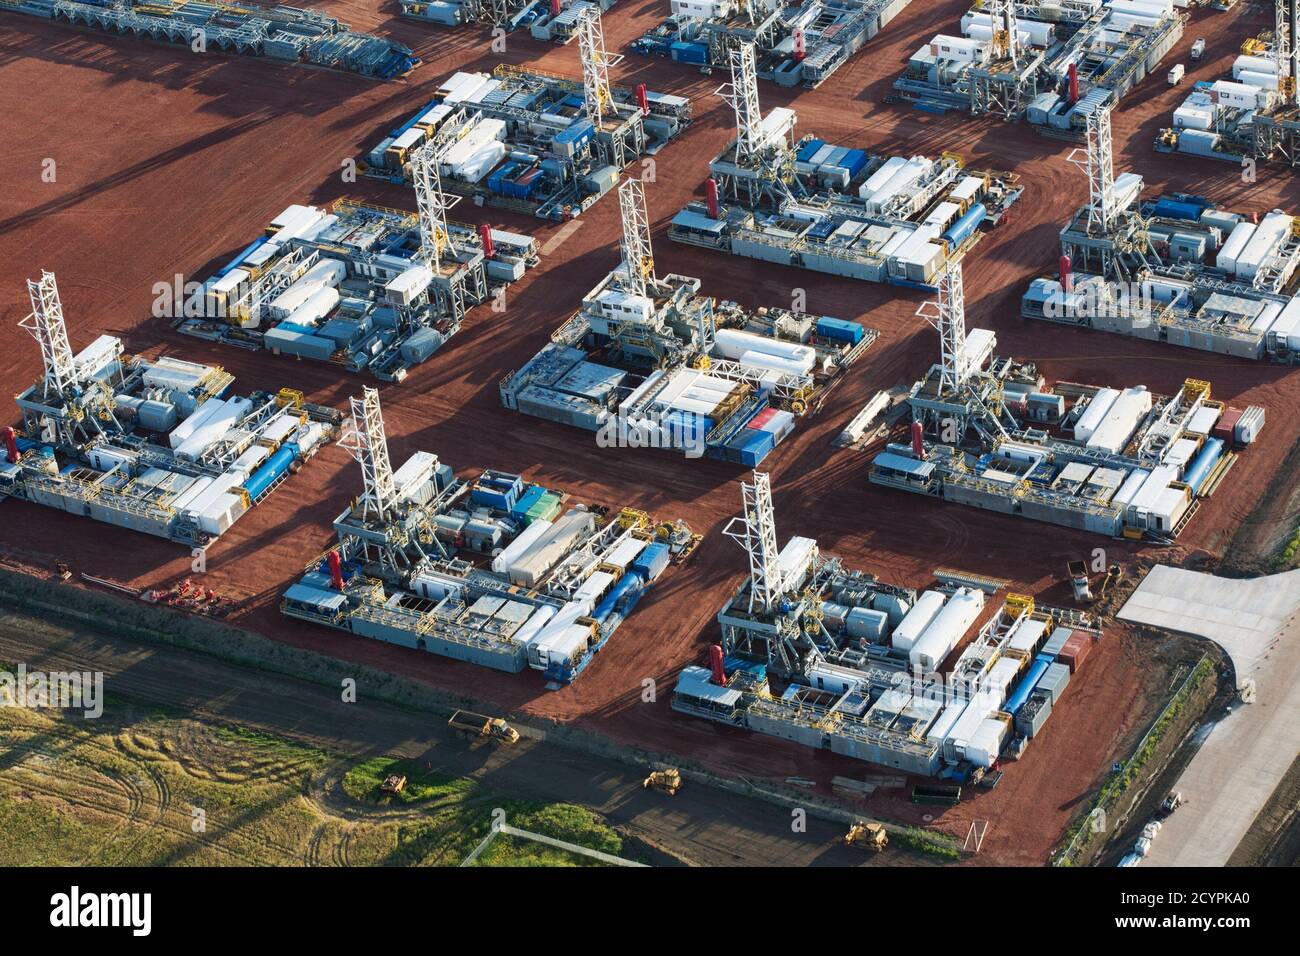 Stacked rigs are seen along with other idled oil drilling equipment at a depot in Dickinson, North Dakota June 26, 2015. Since November, the Saudi Arabian-led OPEC cartel has held to a policy of unconstrained output, an approach many suspect is designed to flood global markets with more crude, push prices lower and punish rivals, including North Dakota, the second-largest U.S. oil producer. REUTERS/Andrew Cullen Stock Photo